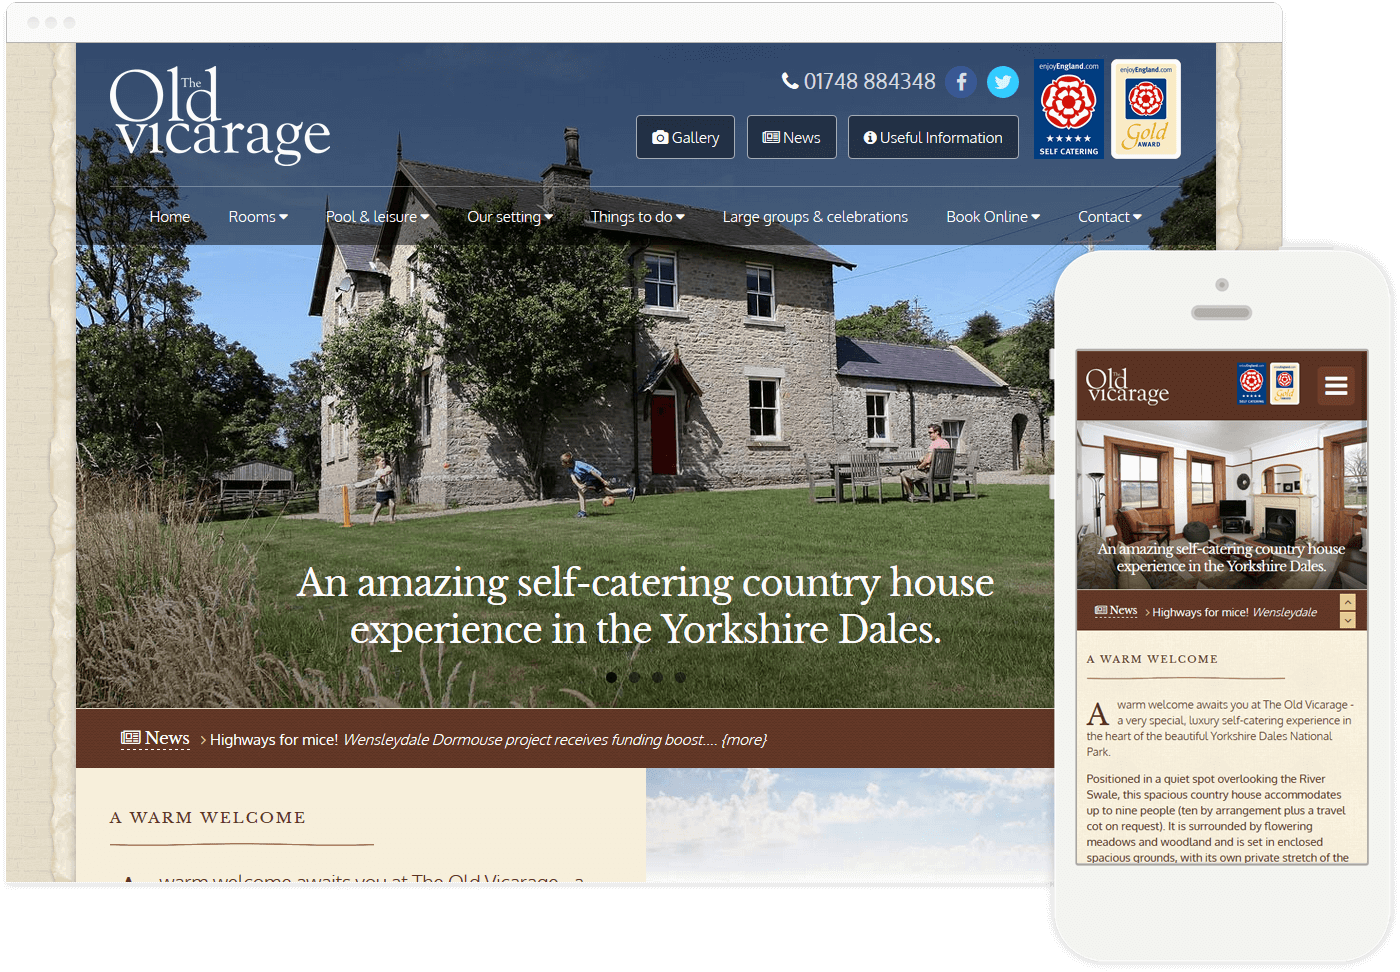 The Old Vicarage Featured Image